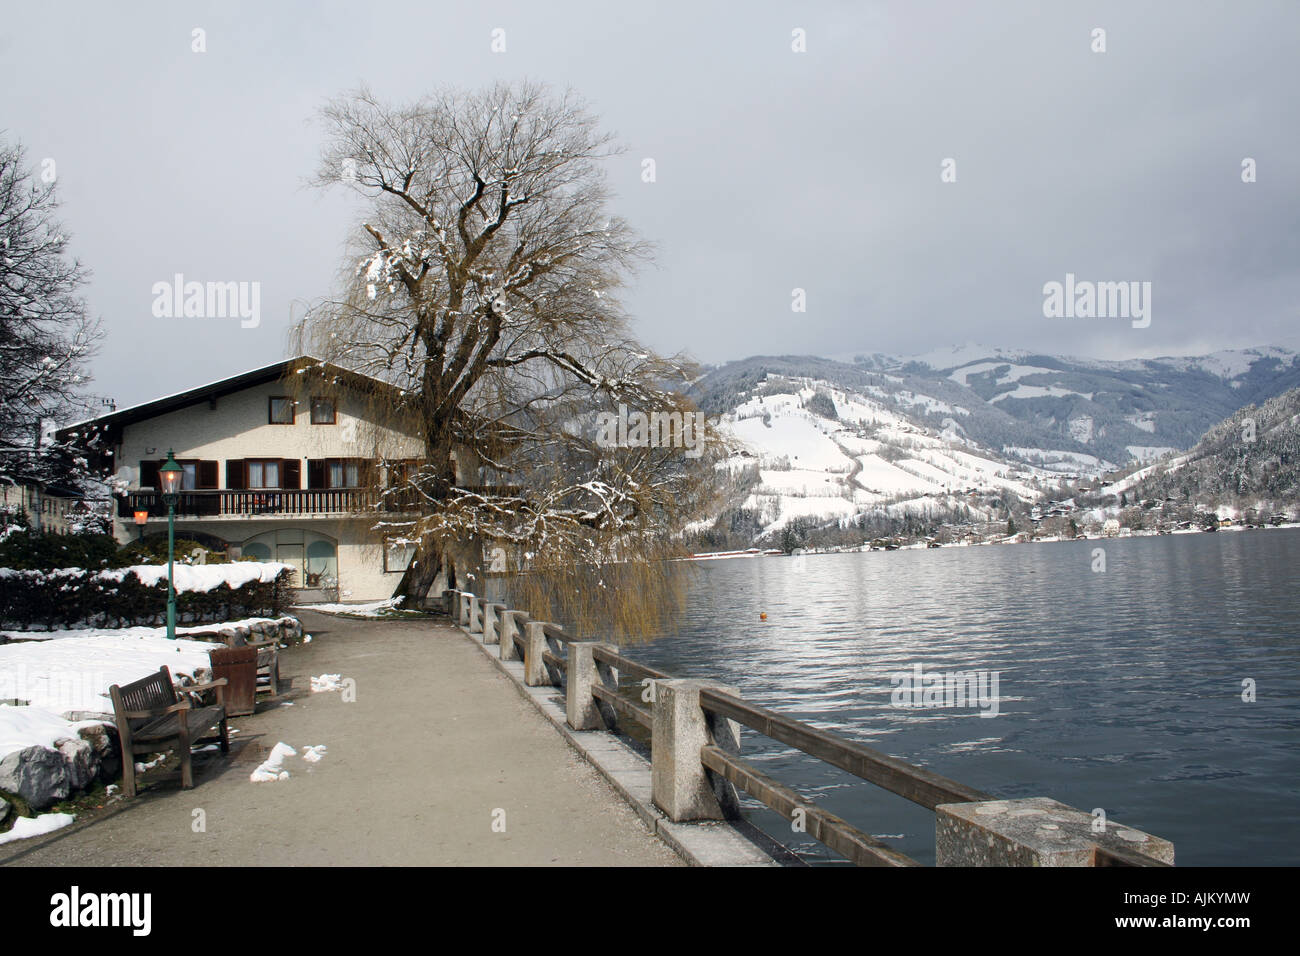 Scenic view of Zeller See lake, Zell am Zee ski resort, with mountains in background, Austrian alps. Stock Photo